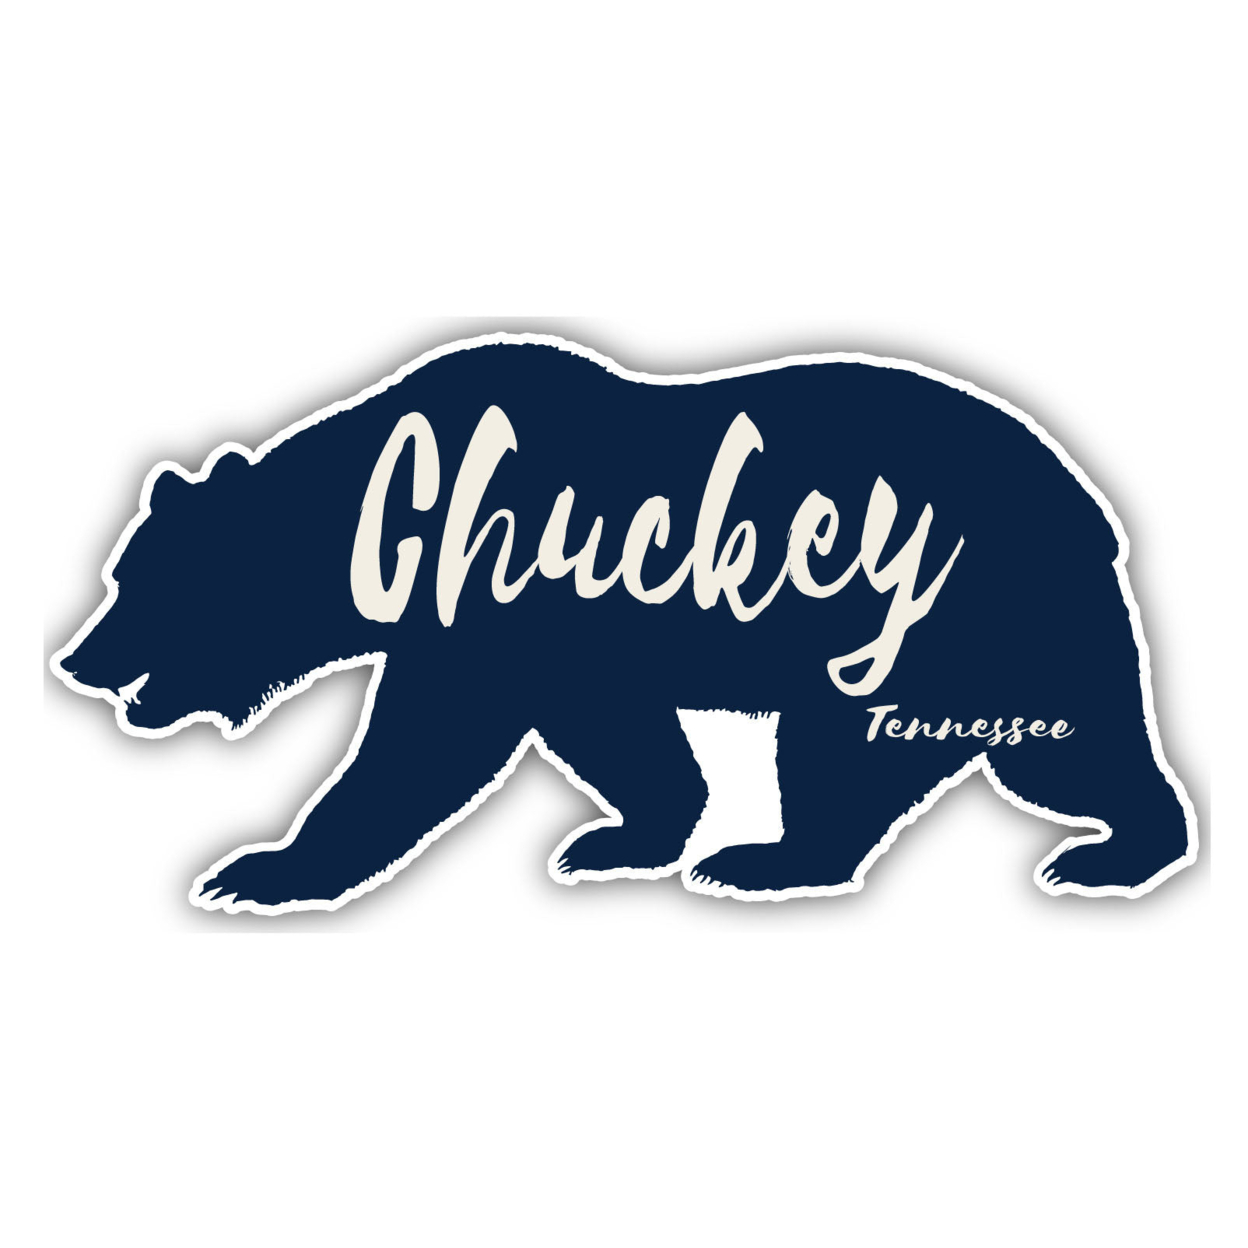 Chuckey Tennessee Souvenir Decorative Stickers (Choose Theme And Size) - 4-Pack, 2-Inch, Adventures Awaits